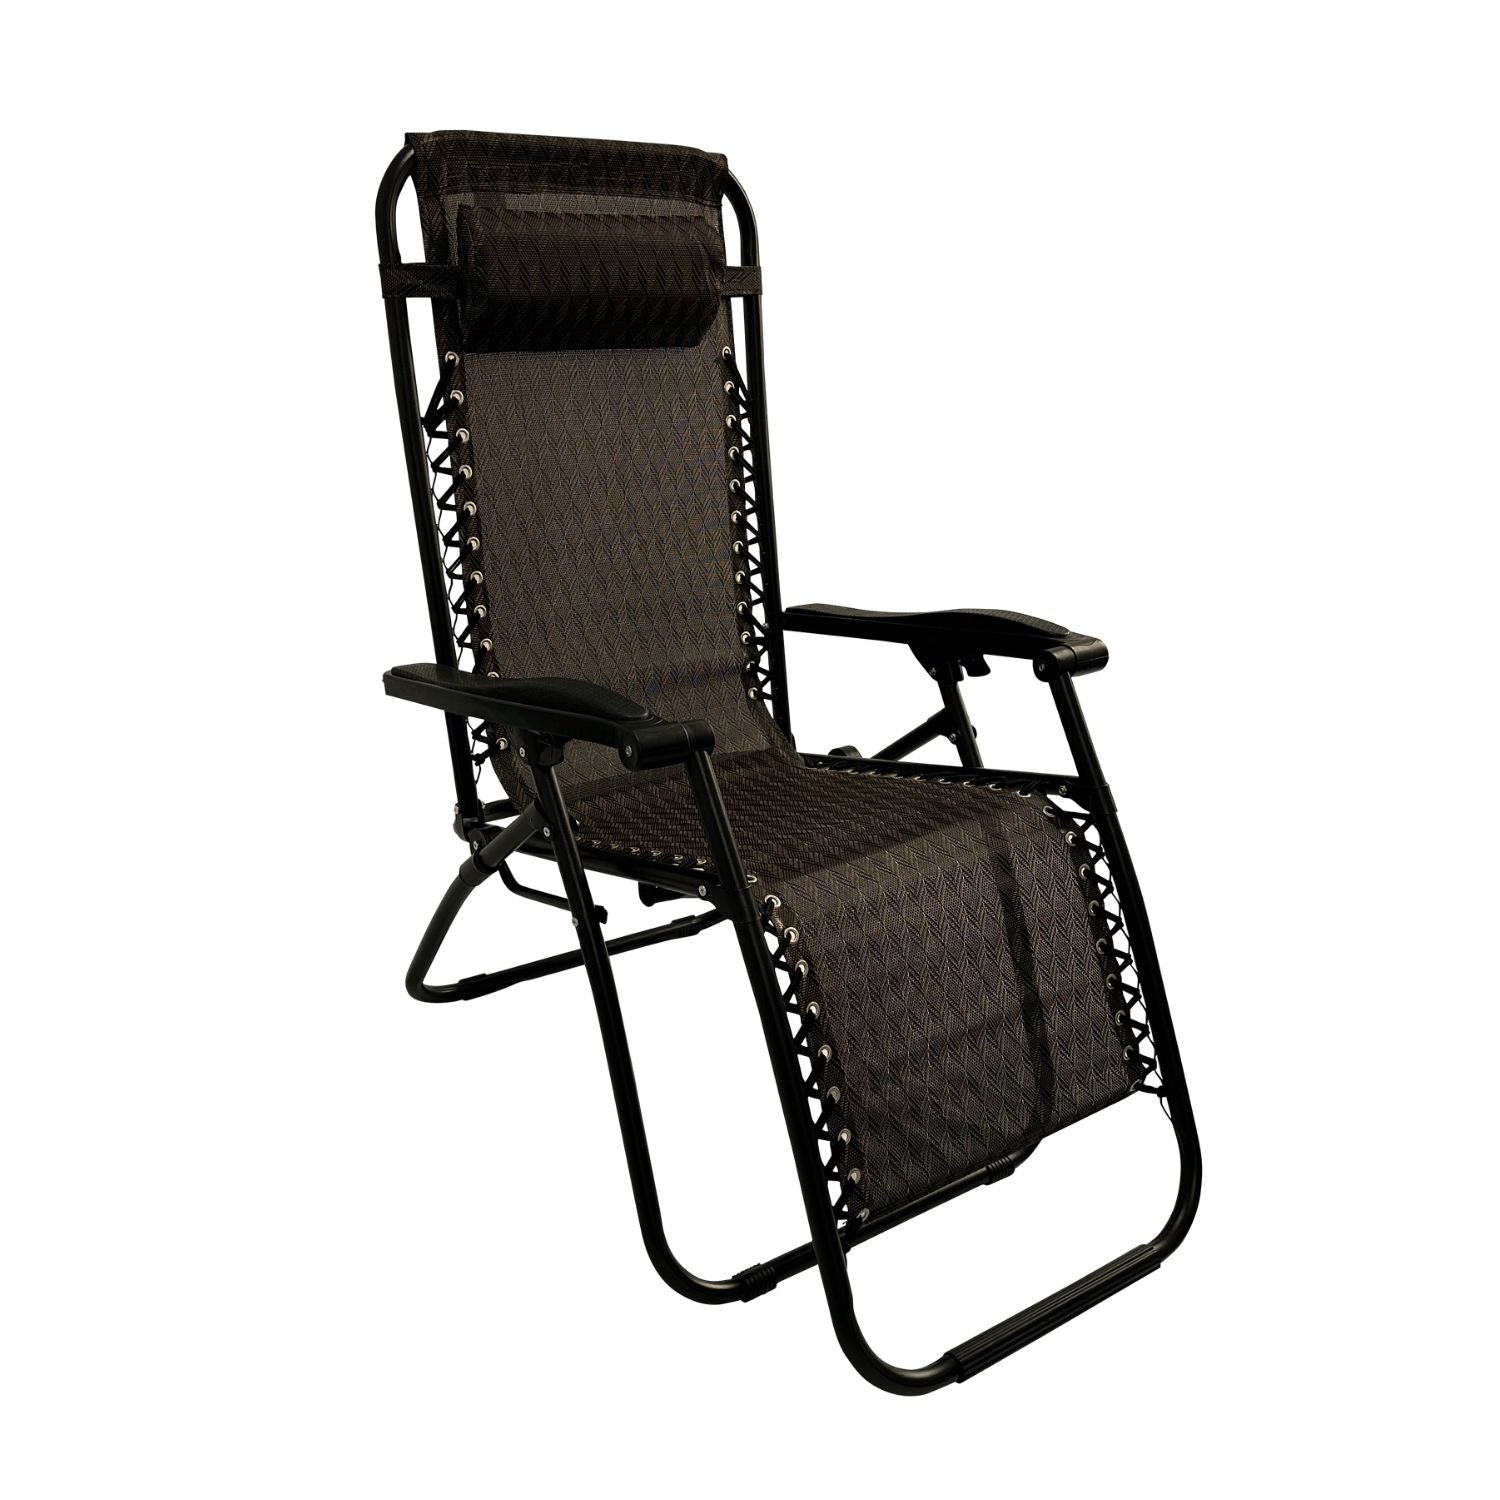 KILIROO Folding Reclining Camping Chair With Breathable Mesh (Argyle)